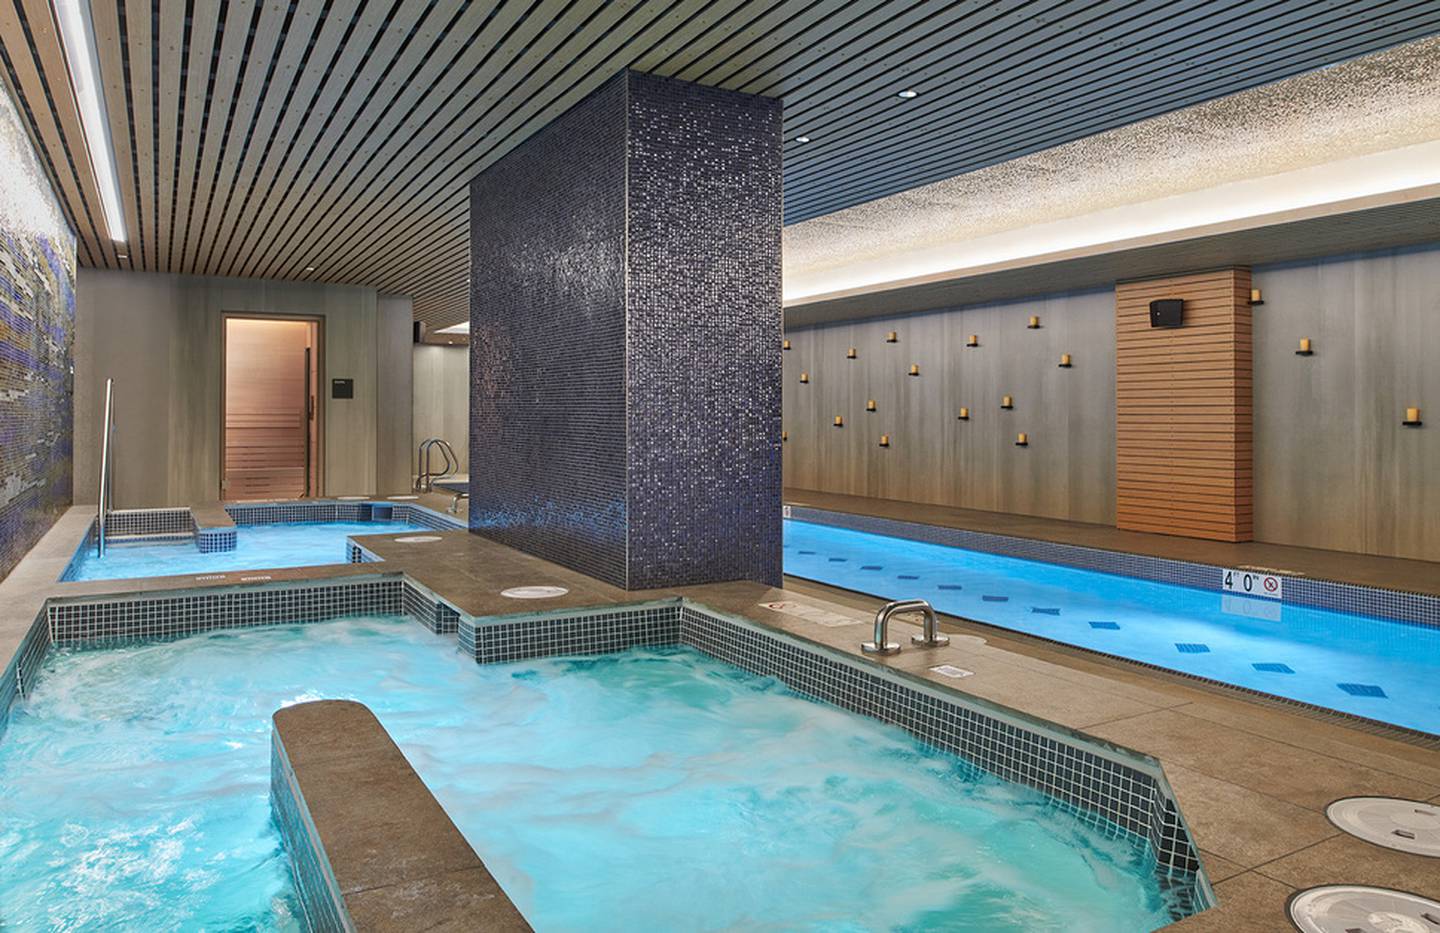 The Washington Crossing Apartments features a luxurious indoor spa.